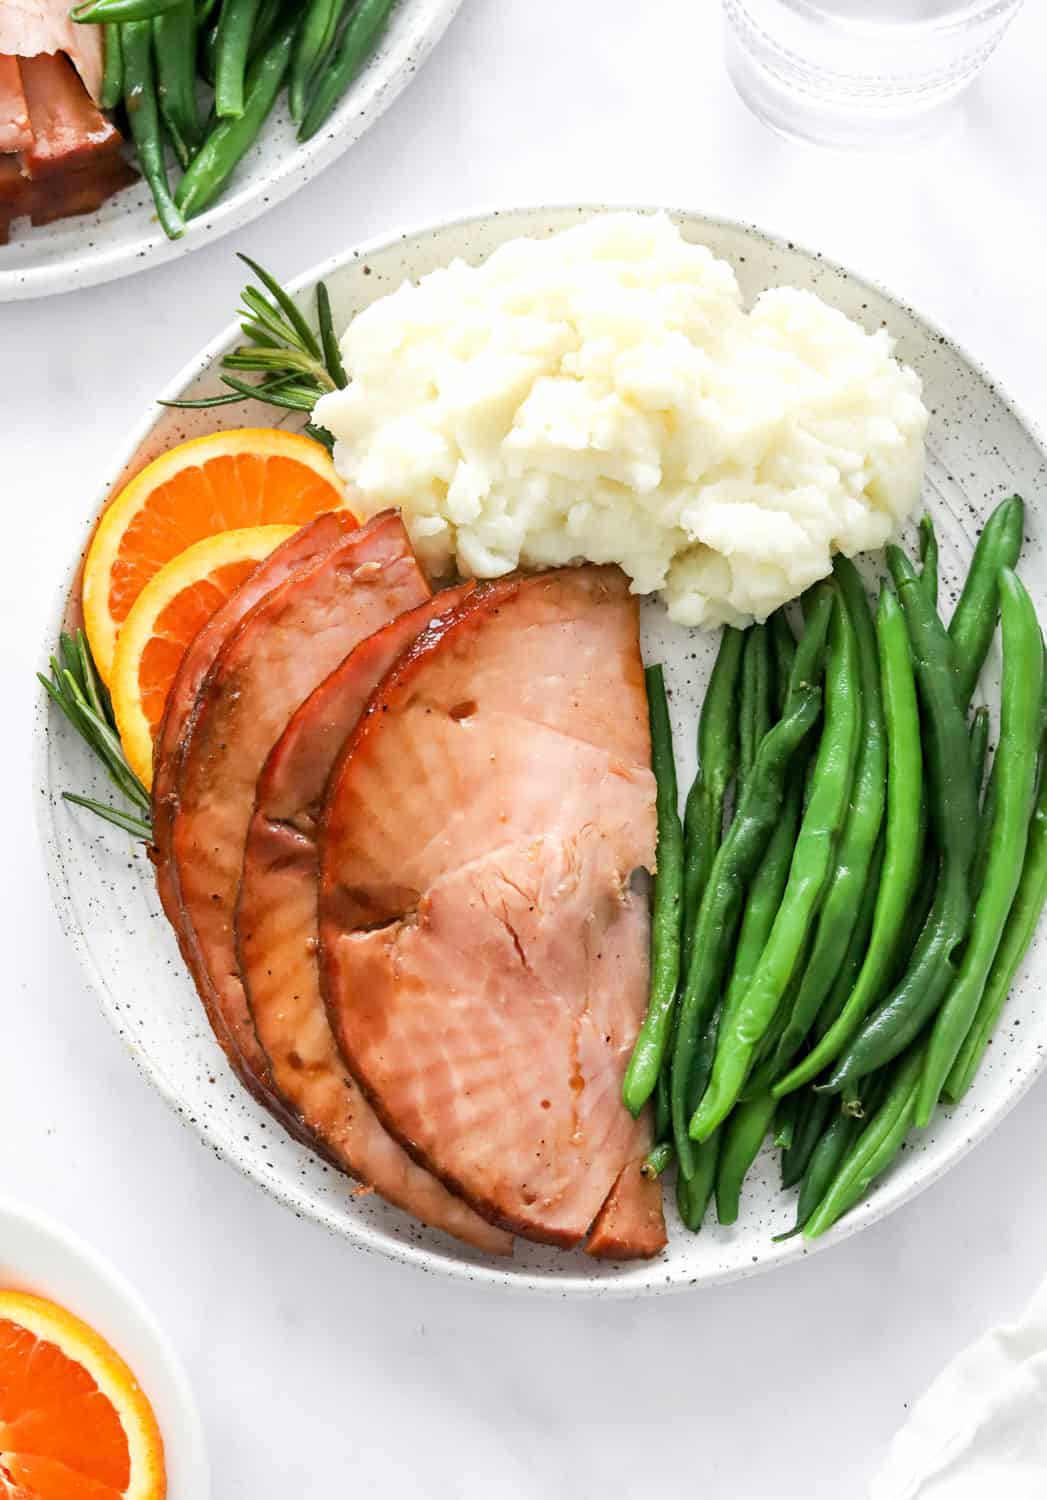 Sliced, cooked air fryer ham on a round plate with green beans and mashed potatoes with orange slices on the plater and in front of it. 